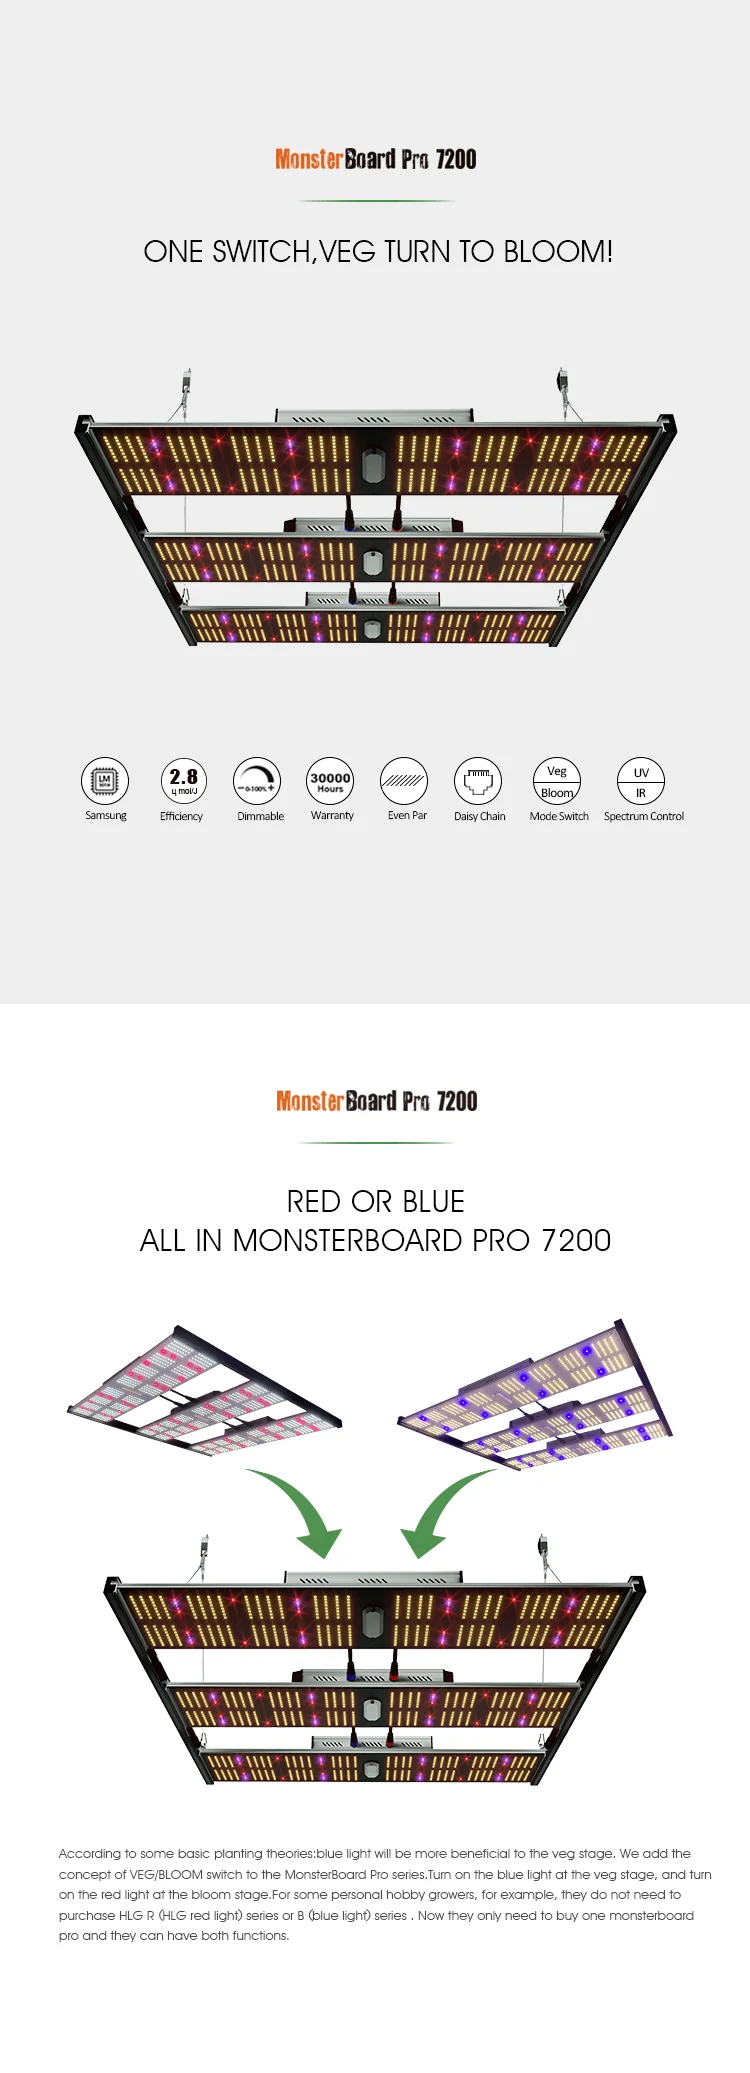 Geeklight 720w grow light led monsterboard pro 7200 veg bloom switchable lm301h led grow light for indoor farming